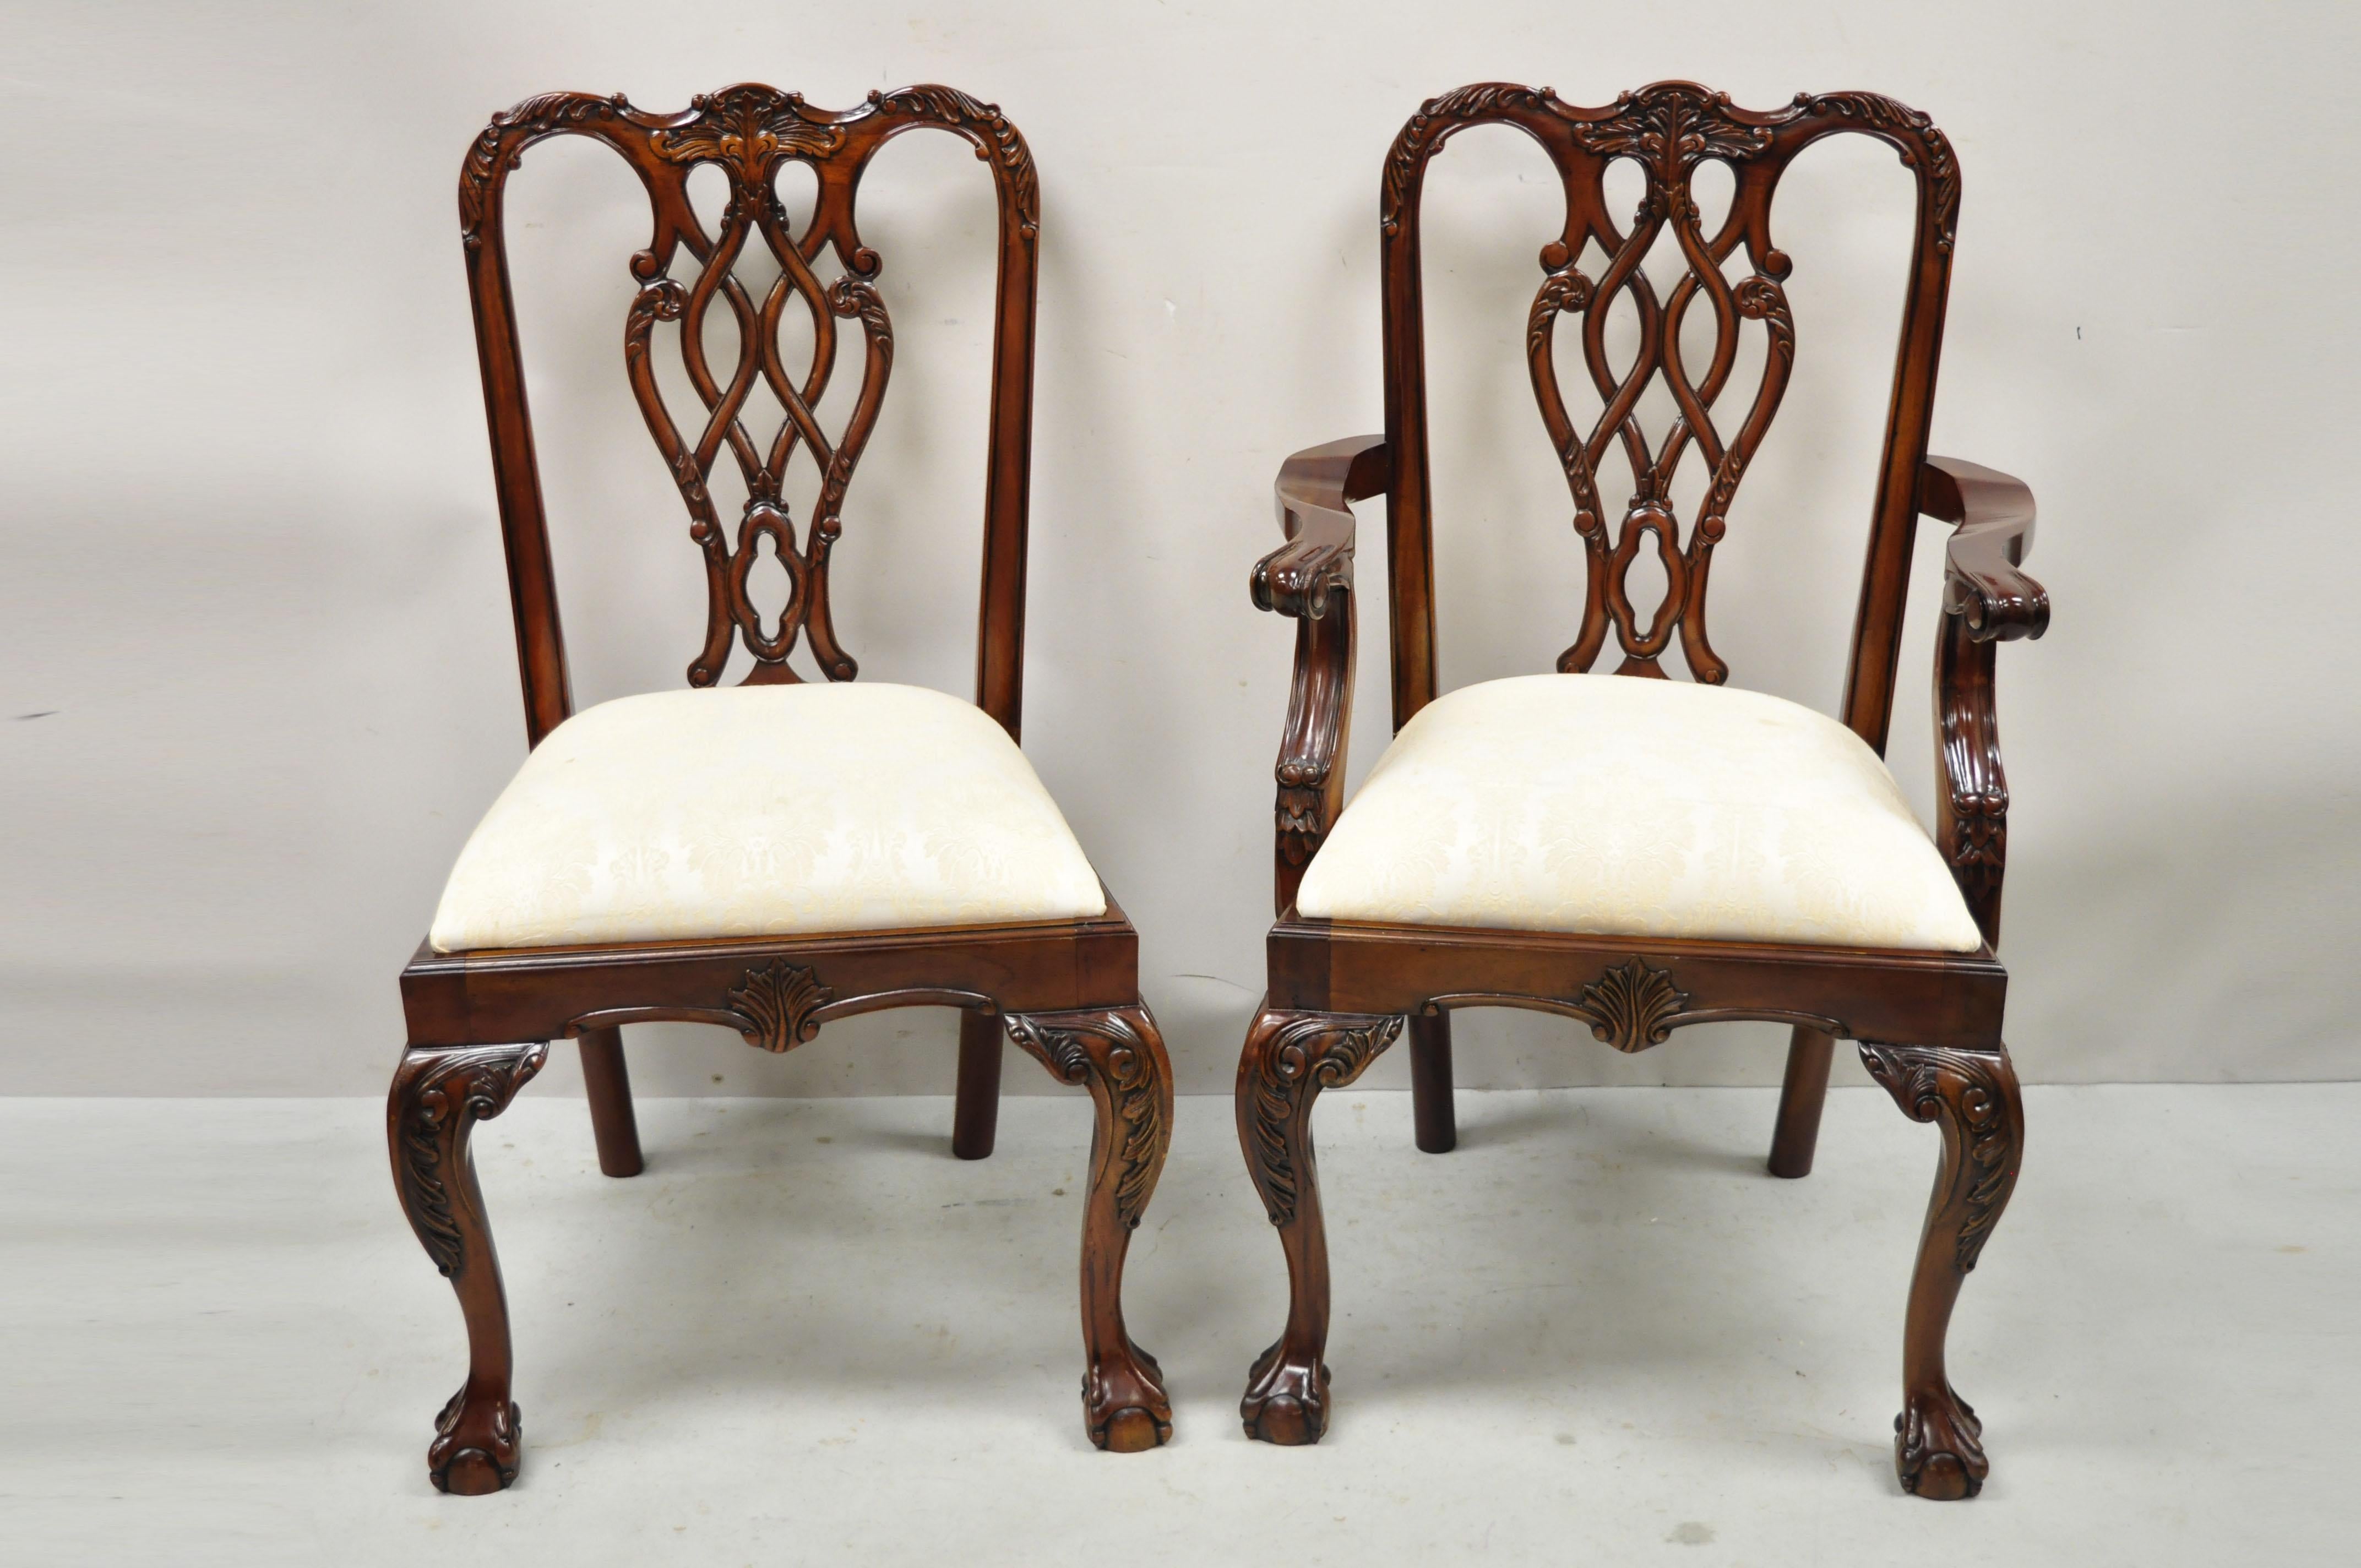 English Chippendale style carved mahogany ball & claw dining chairs - Set of 8. Item features (2) armchairs, (6) side chairs, solid wood frames, beautiful wood grain, nicely carved details, carved ball and claw feet, very nice set, quality